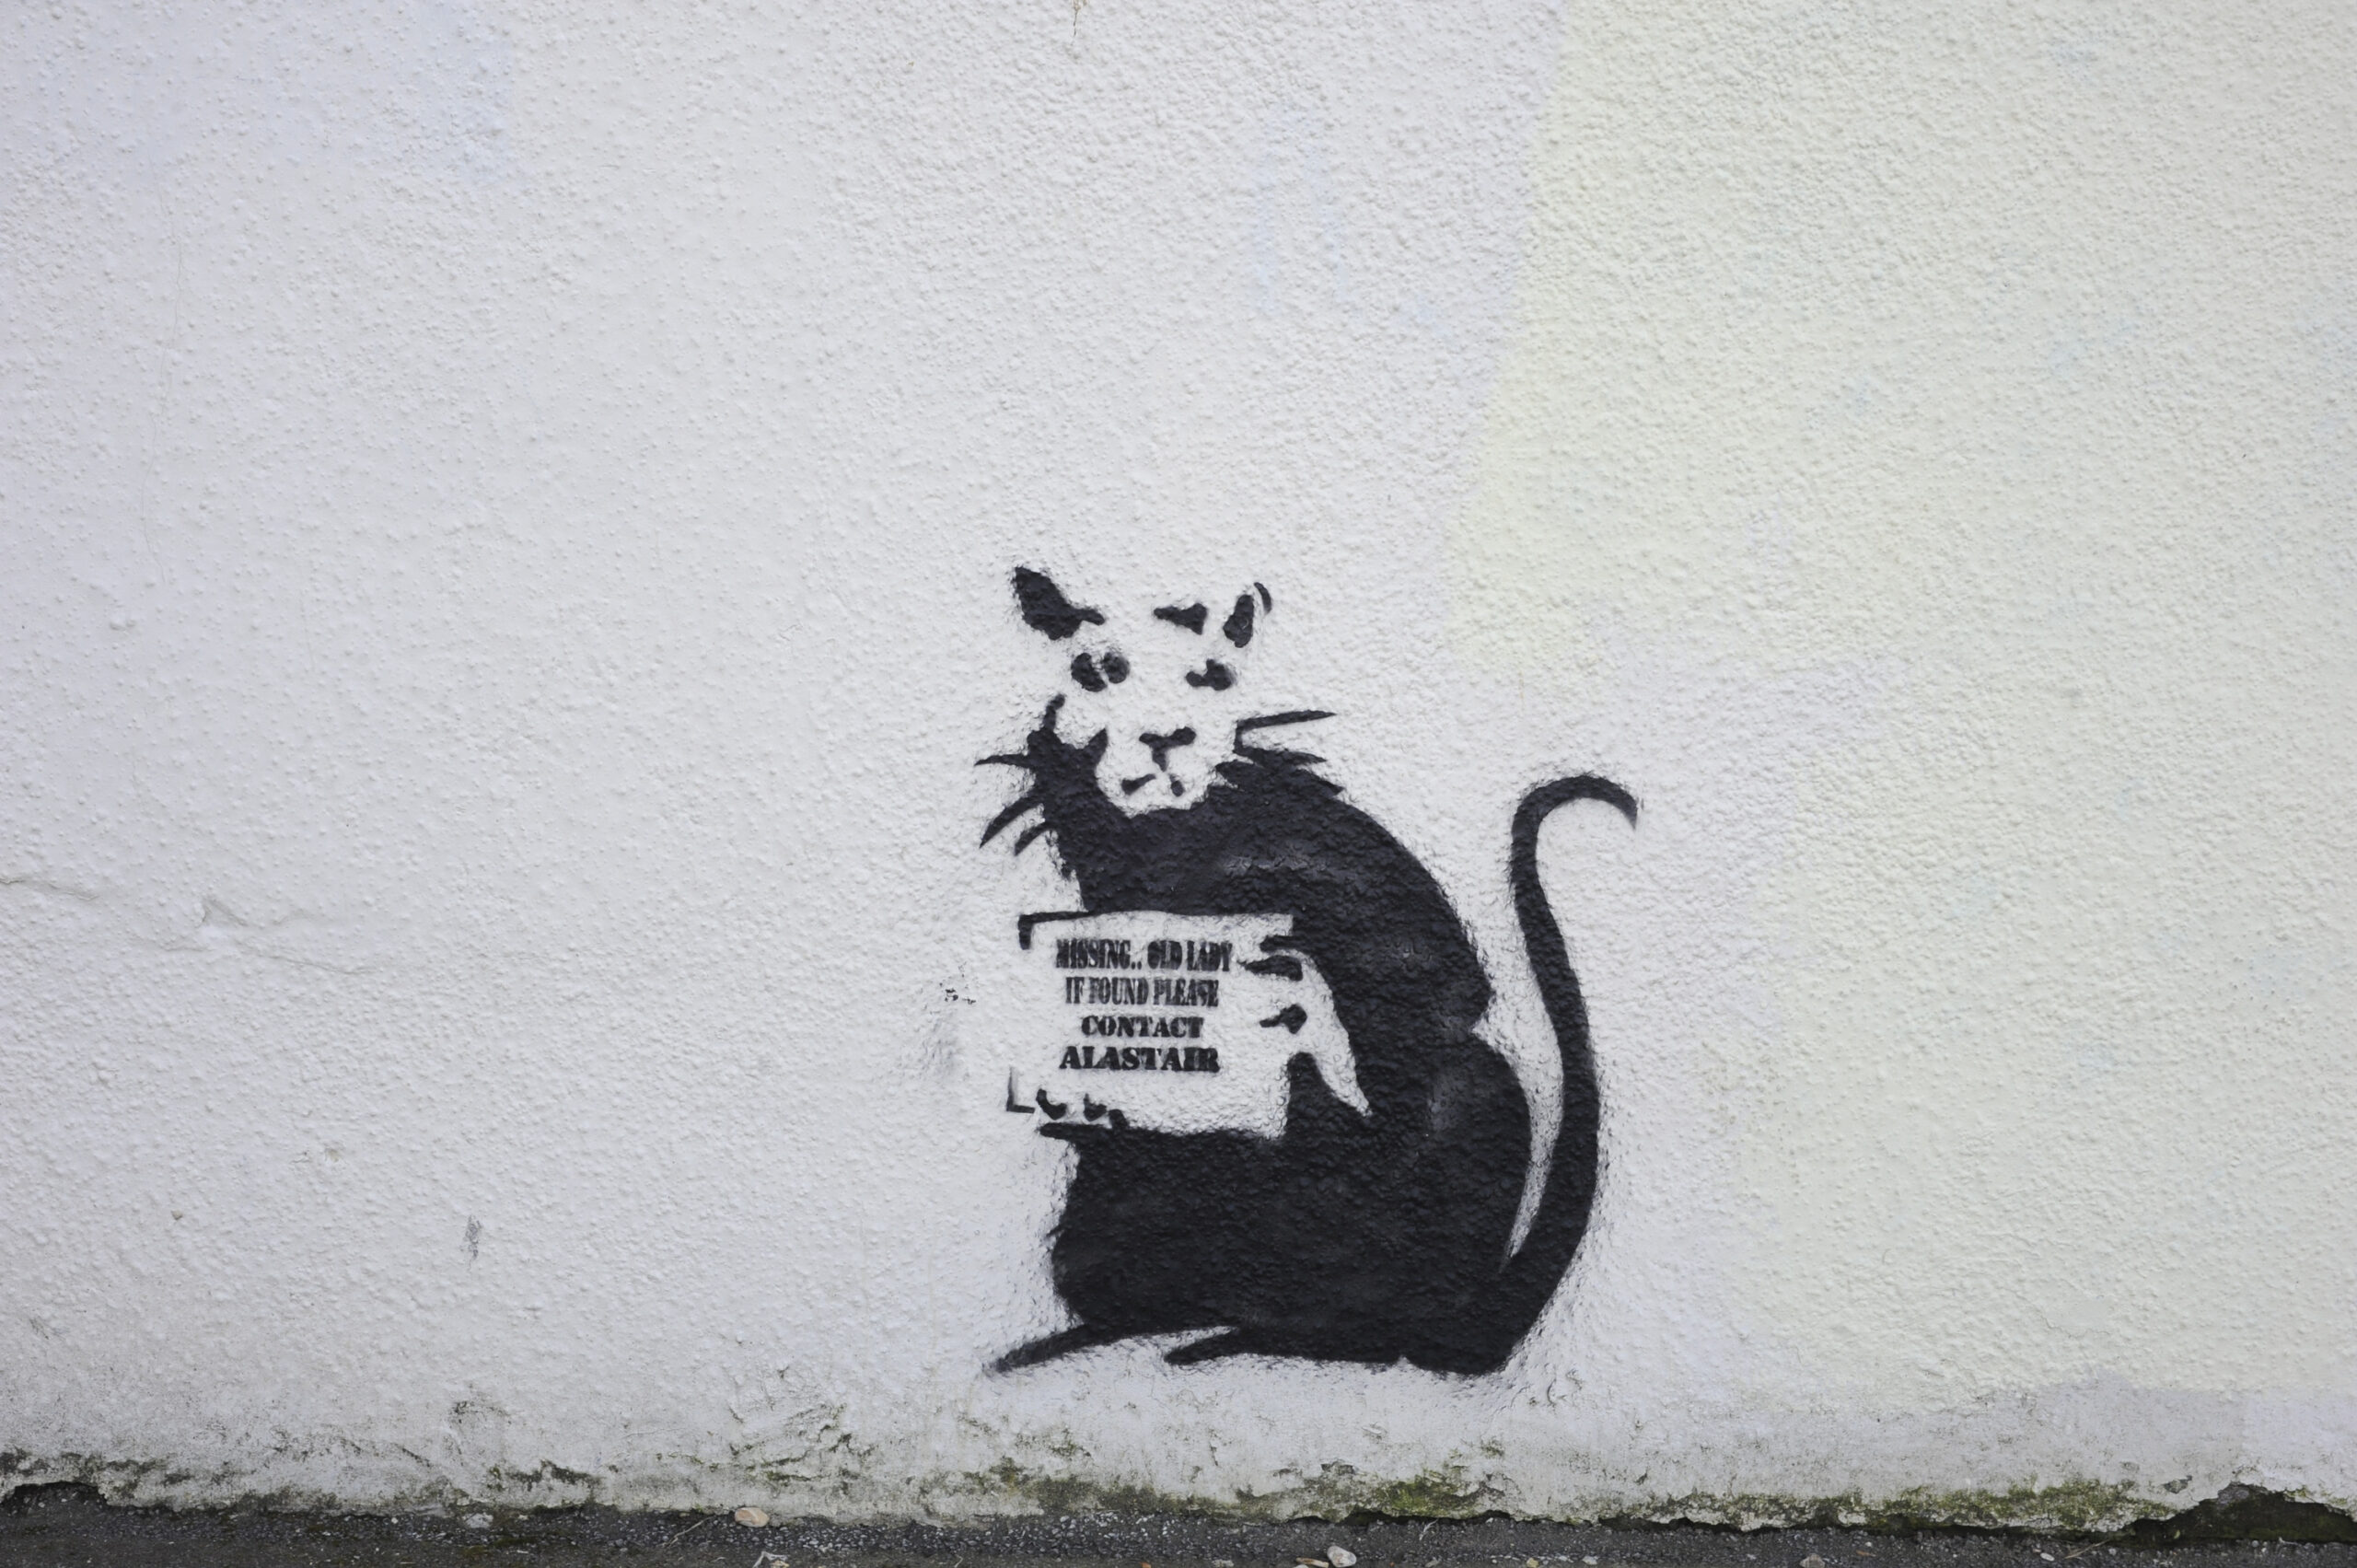 As Banksy’s work made its mark across the UK, there was much debate as to the artist’s identity